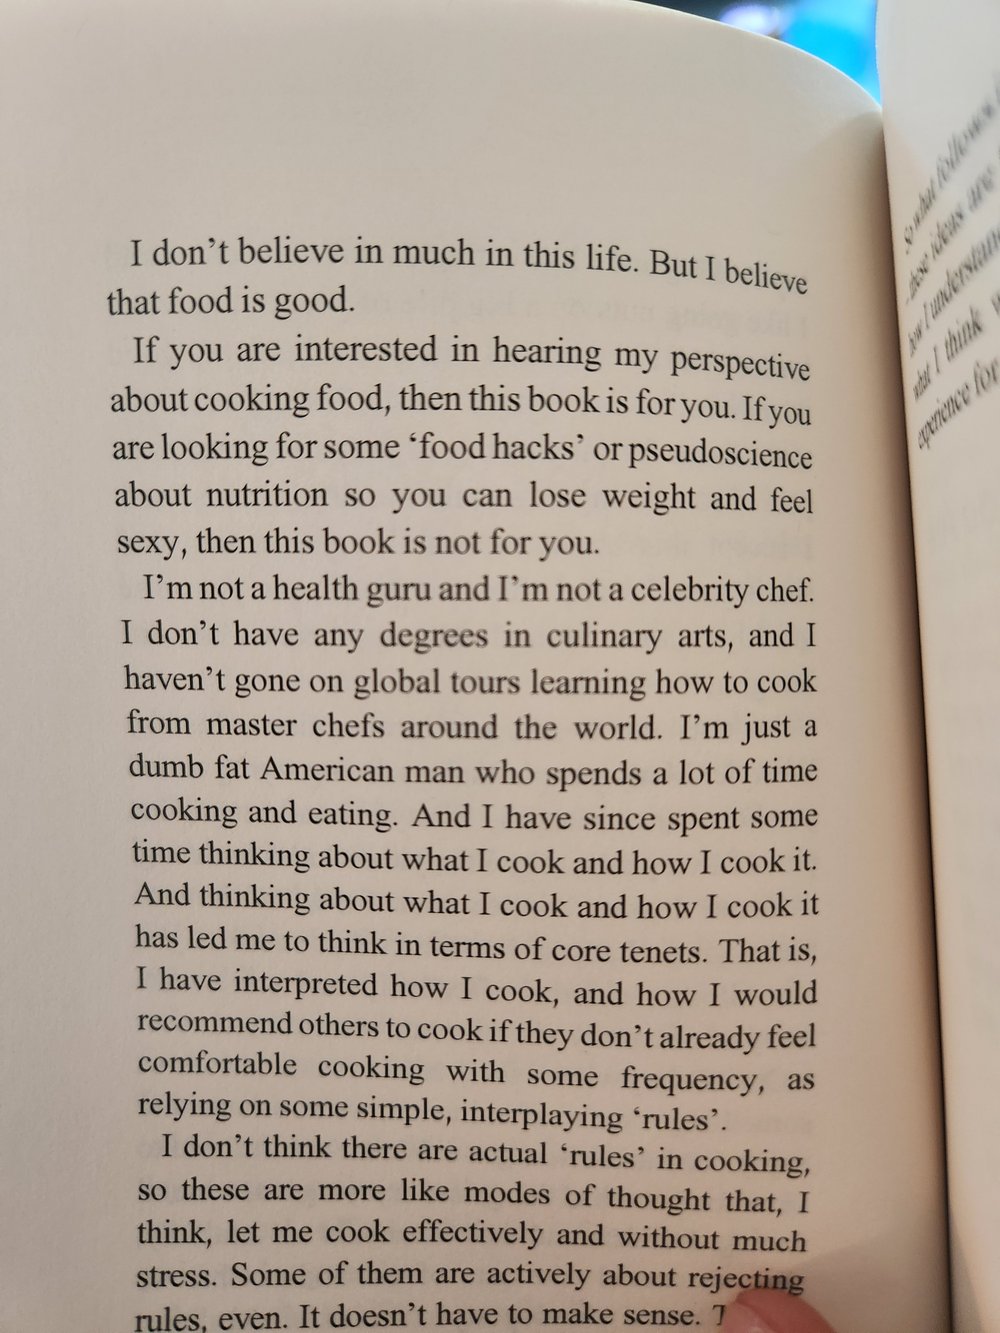 I Hope You Enjoy the Food: A Cookbook Manifesto Thing by Zac Smith